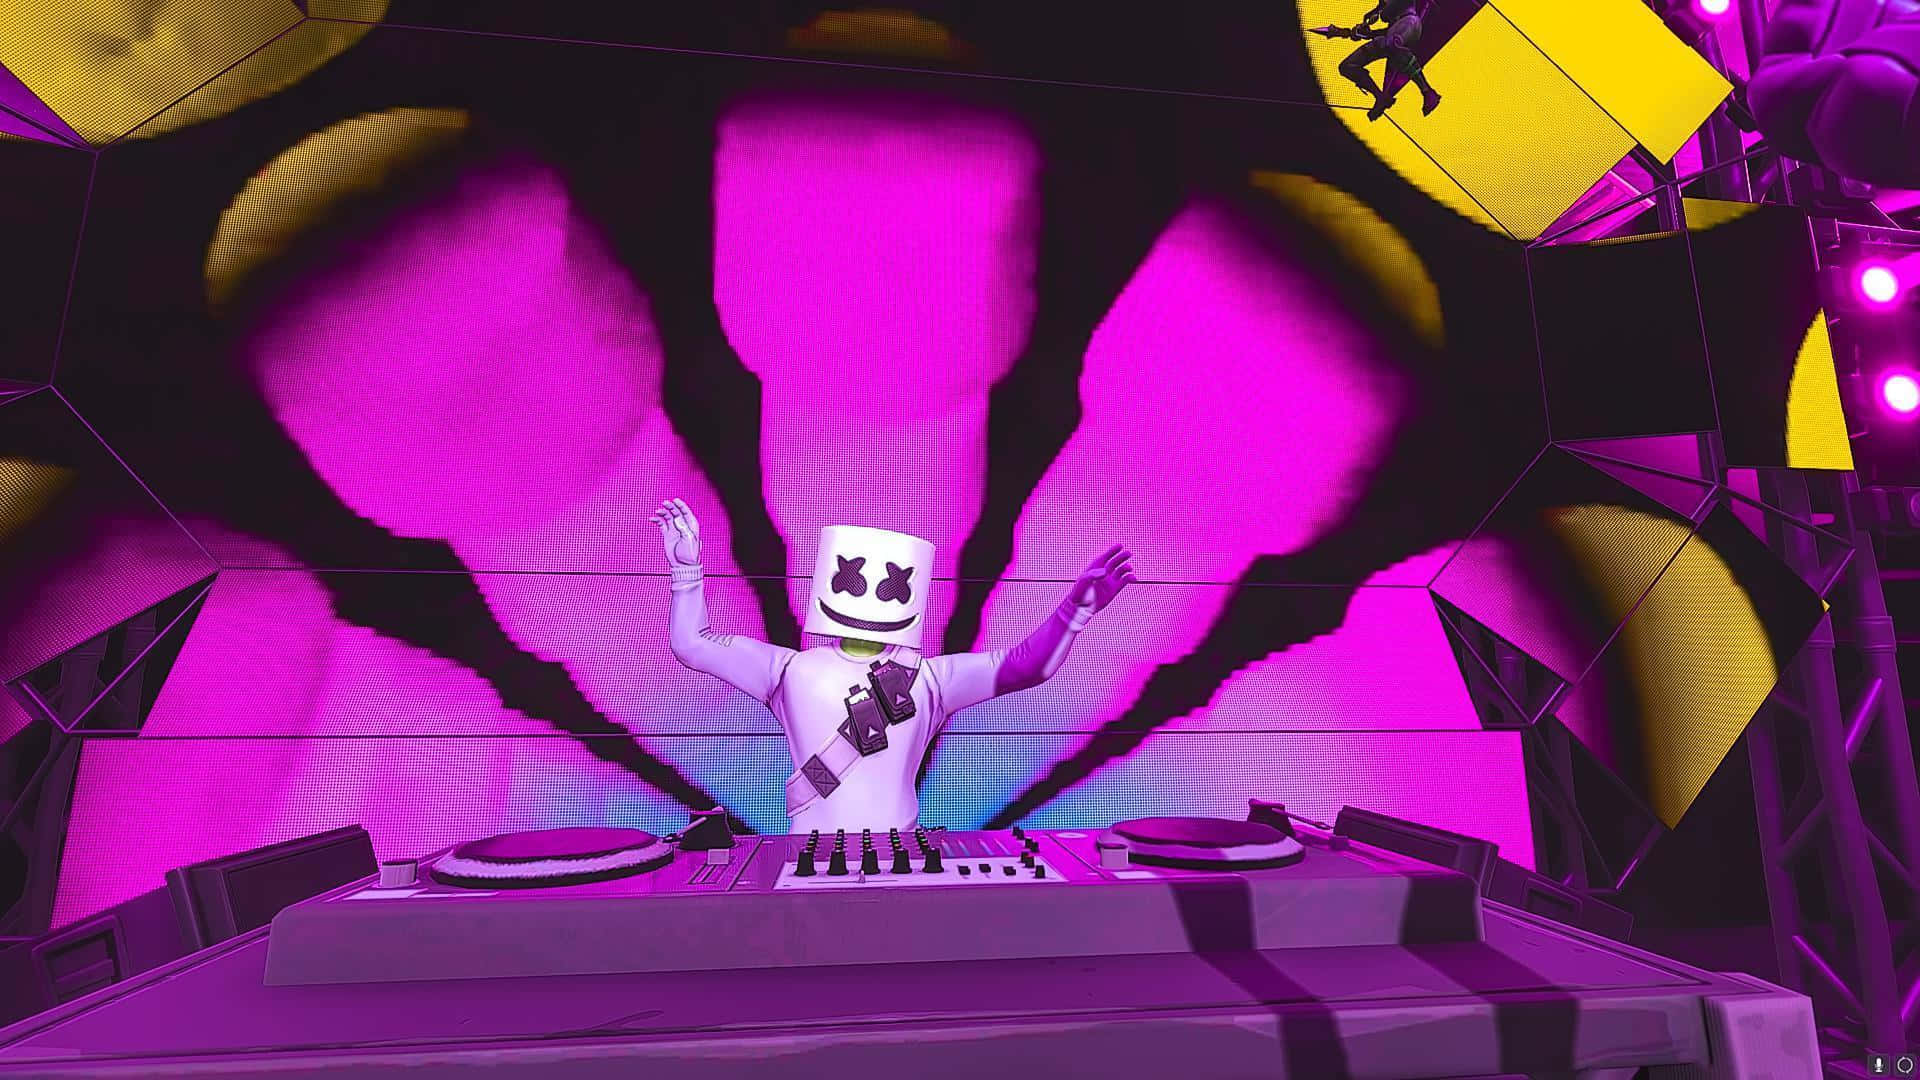 Marshmello - An Up-and-Coming Producer Who's Taking the Music Scene By Storm